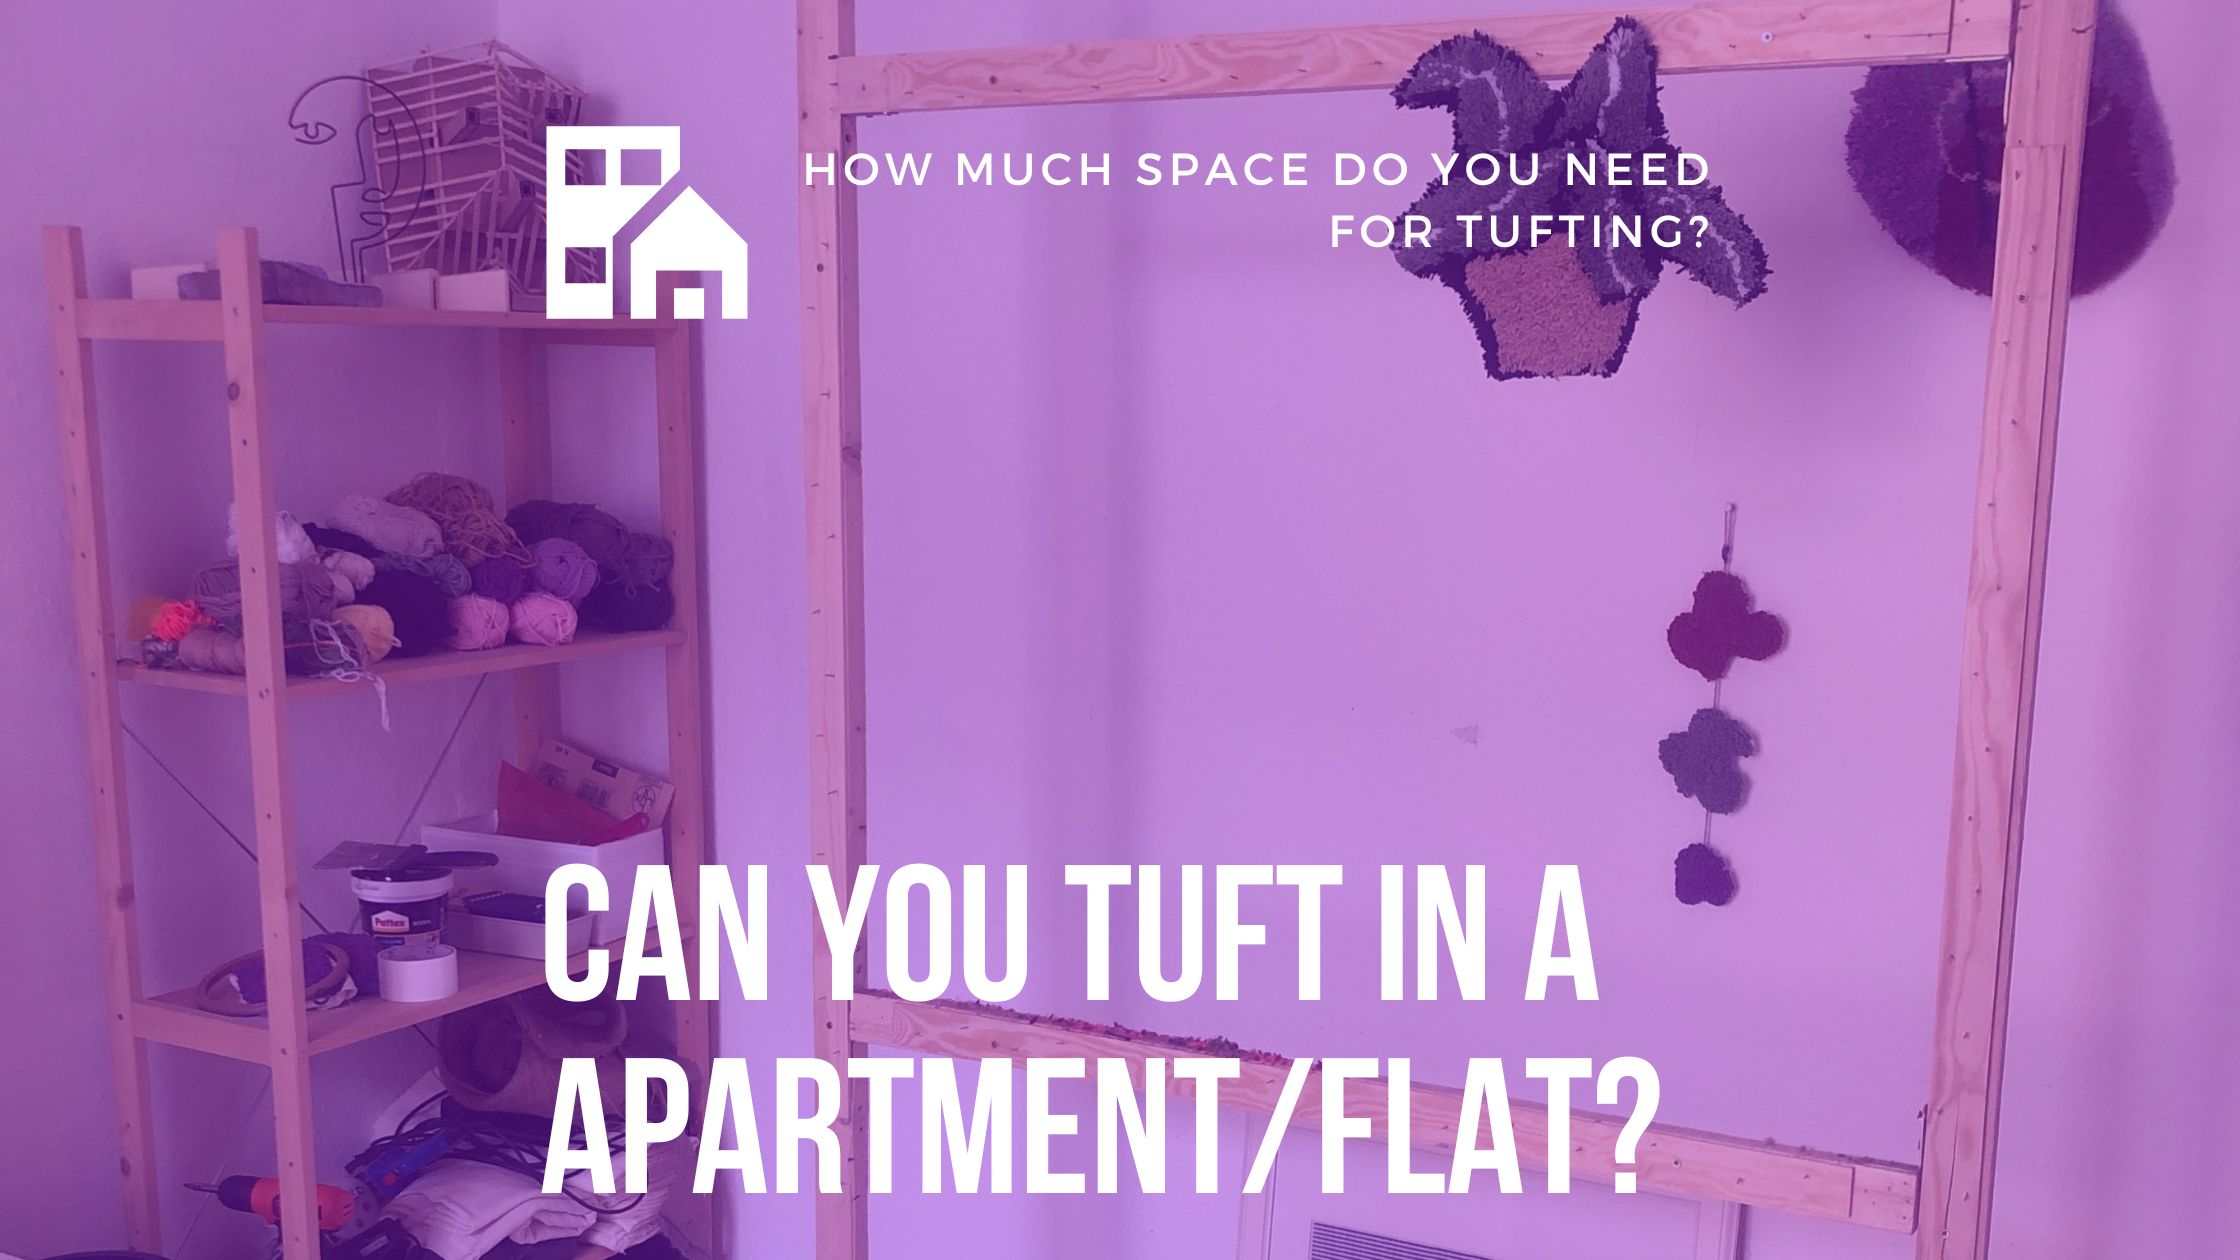 Can You Tuft In Your Apartment/Flat?